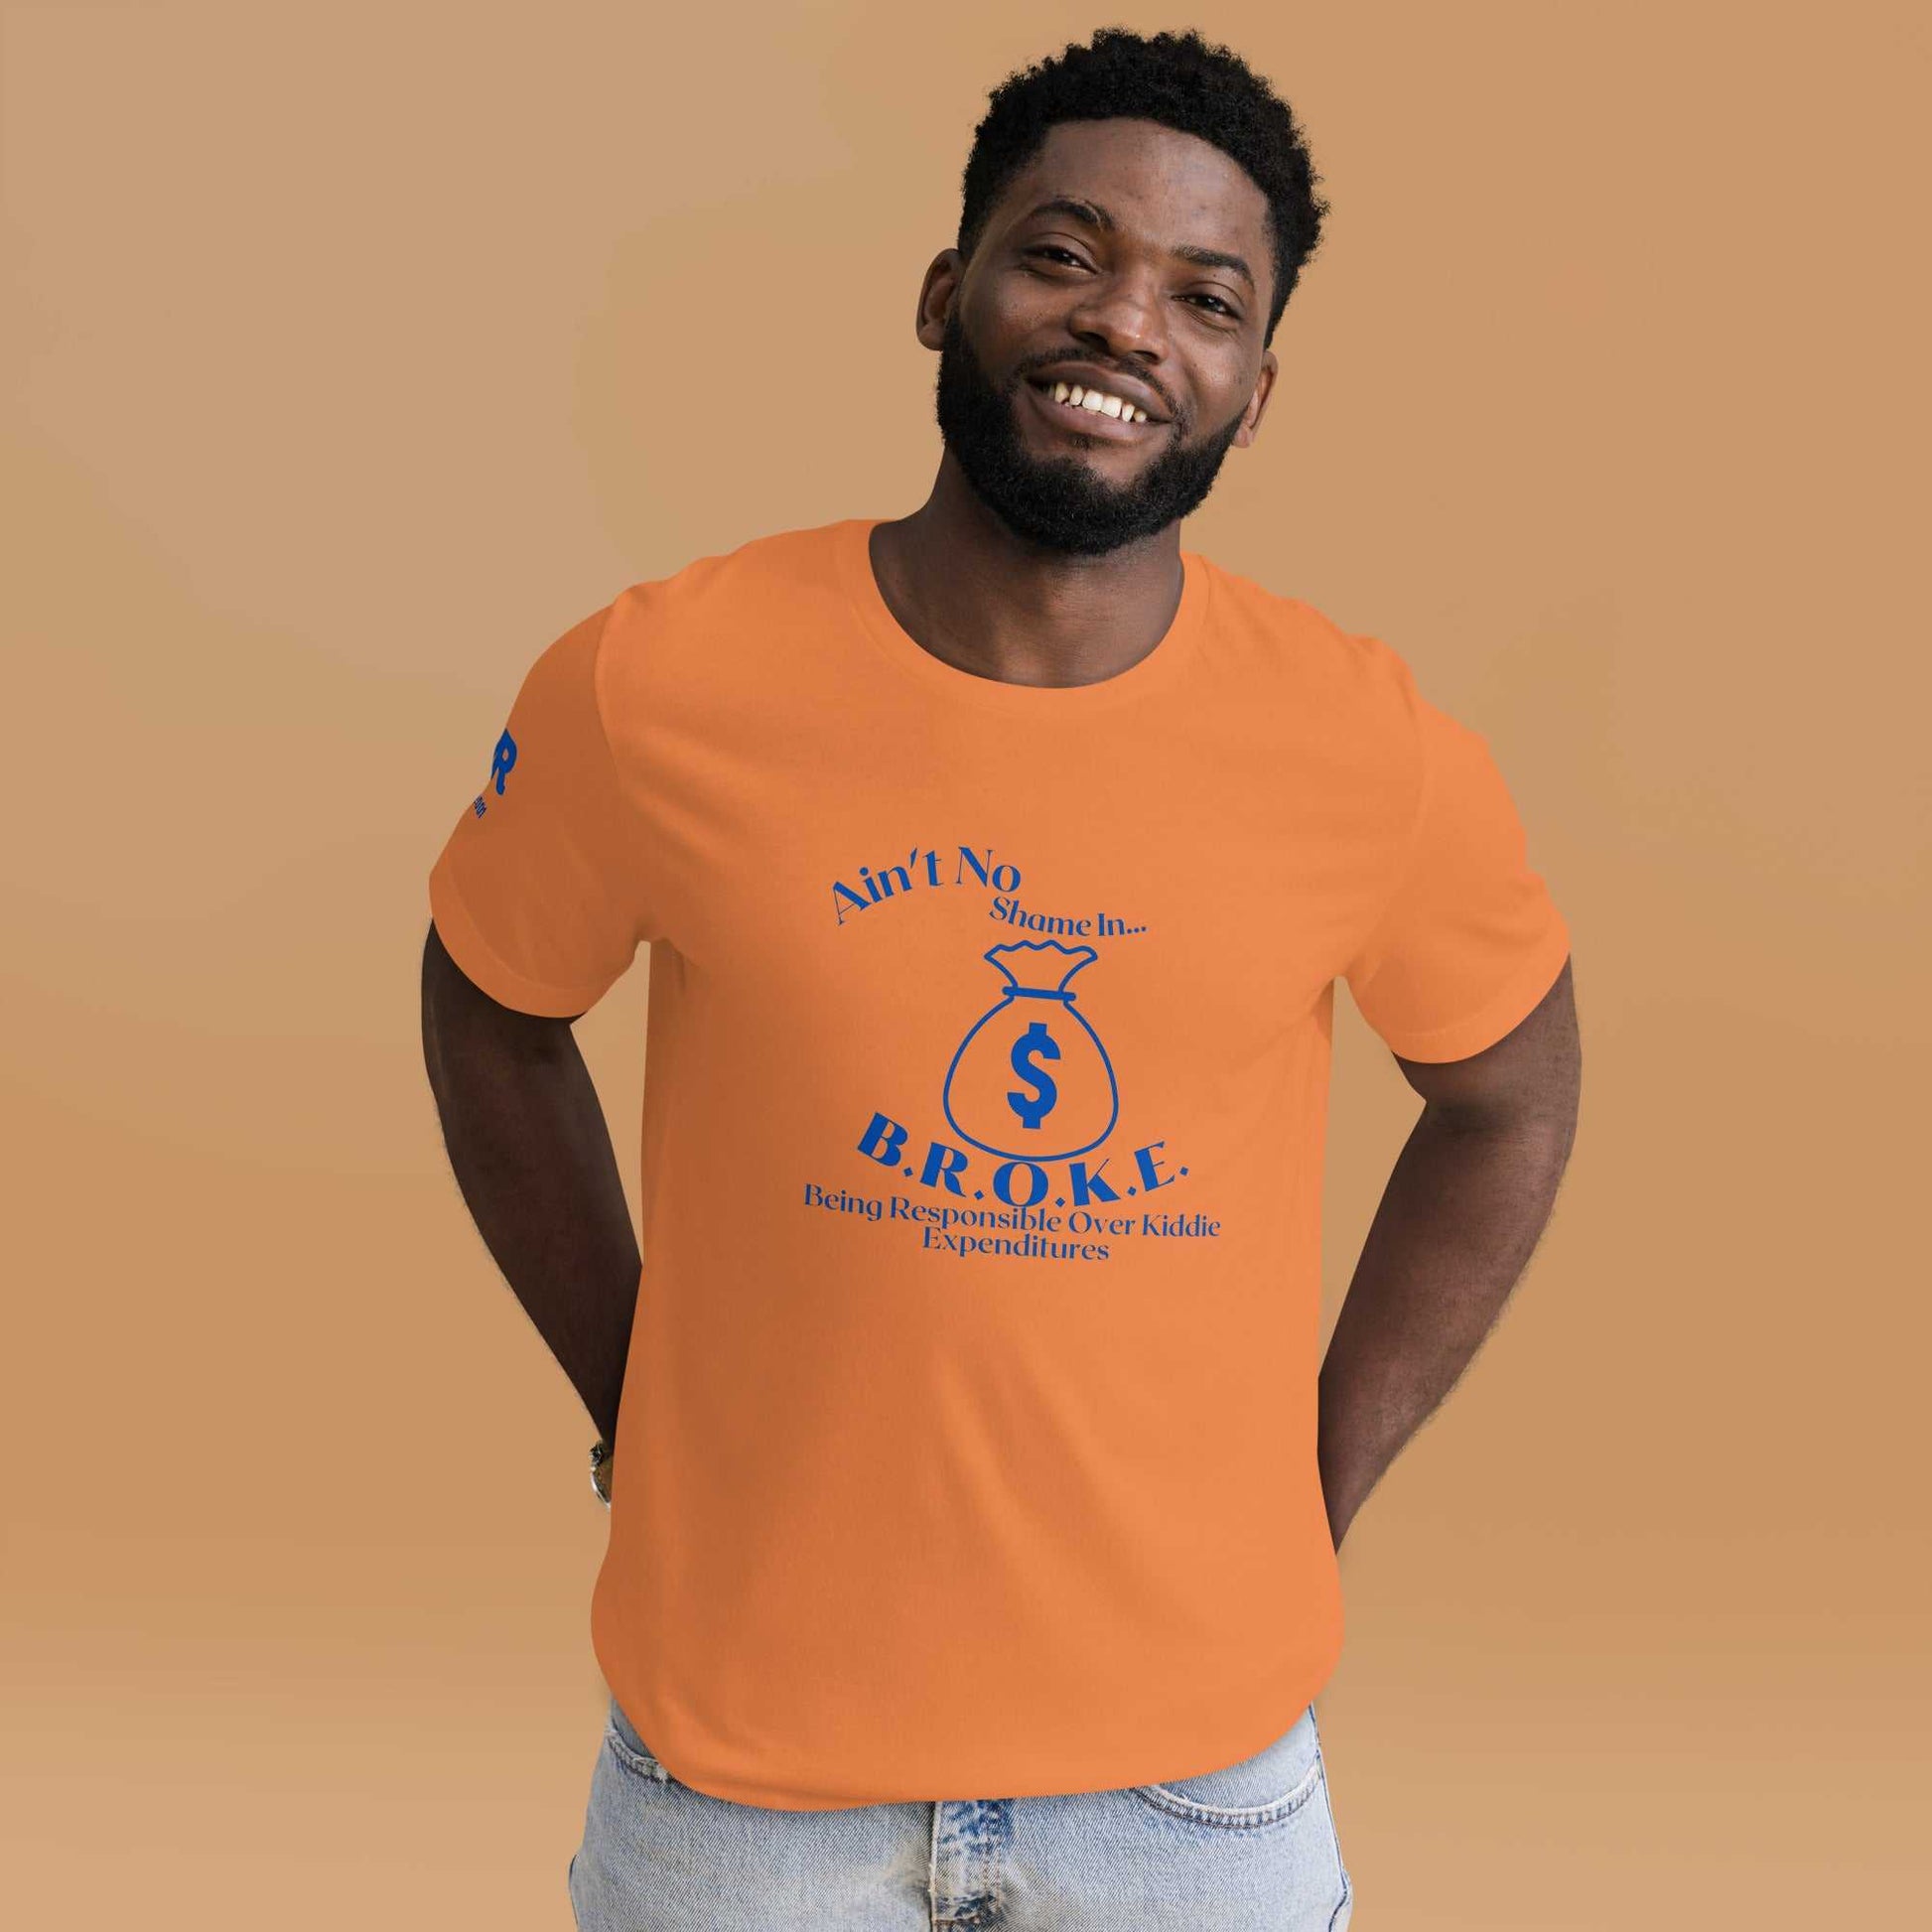 JMR Broke Special Edition Orange Tee-Shirt The JMR Collection T-shirt Good Vibes Daily Lab 28